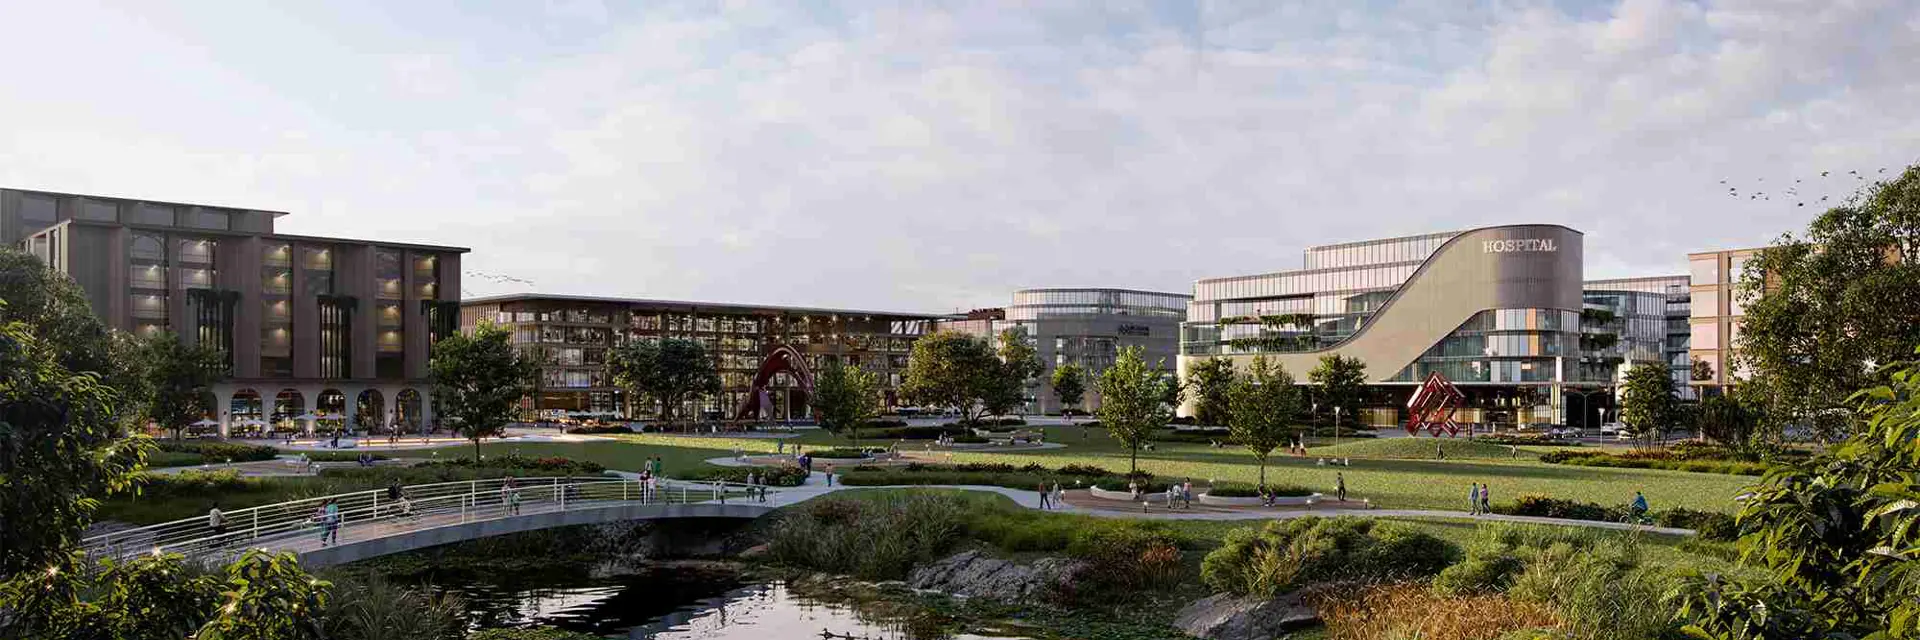 Artist's impression a lake and buildings, including a hospital 